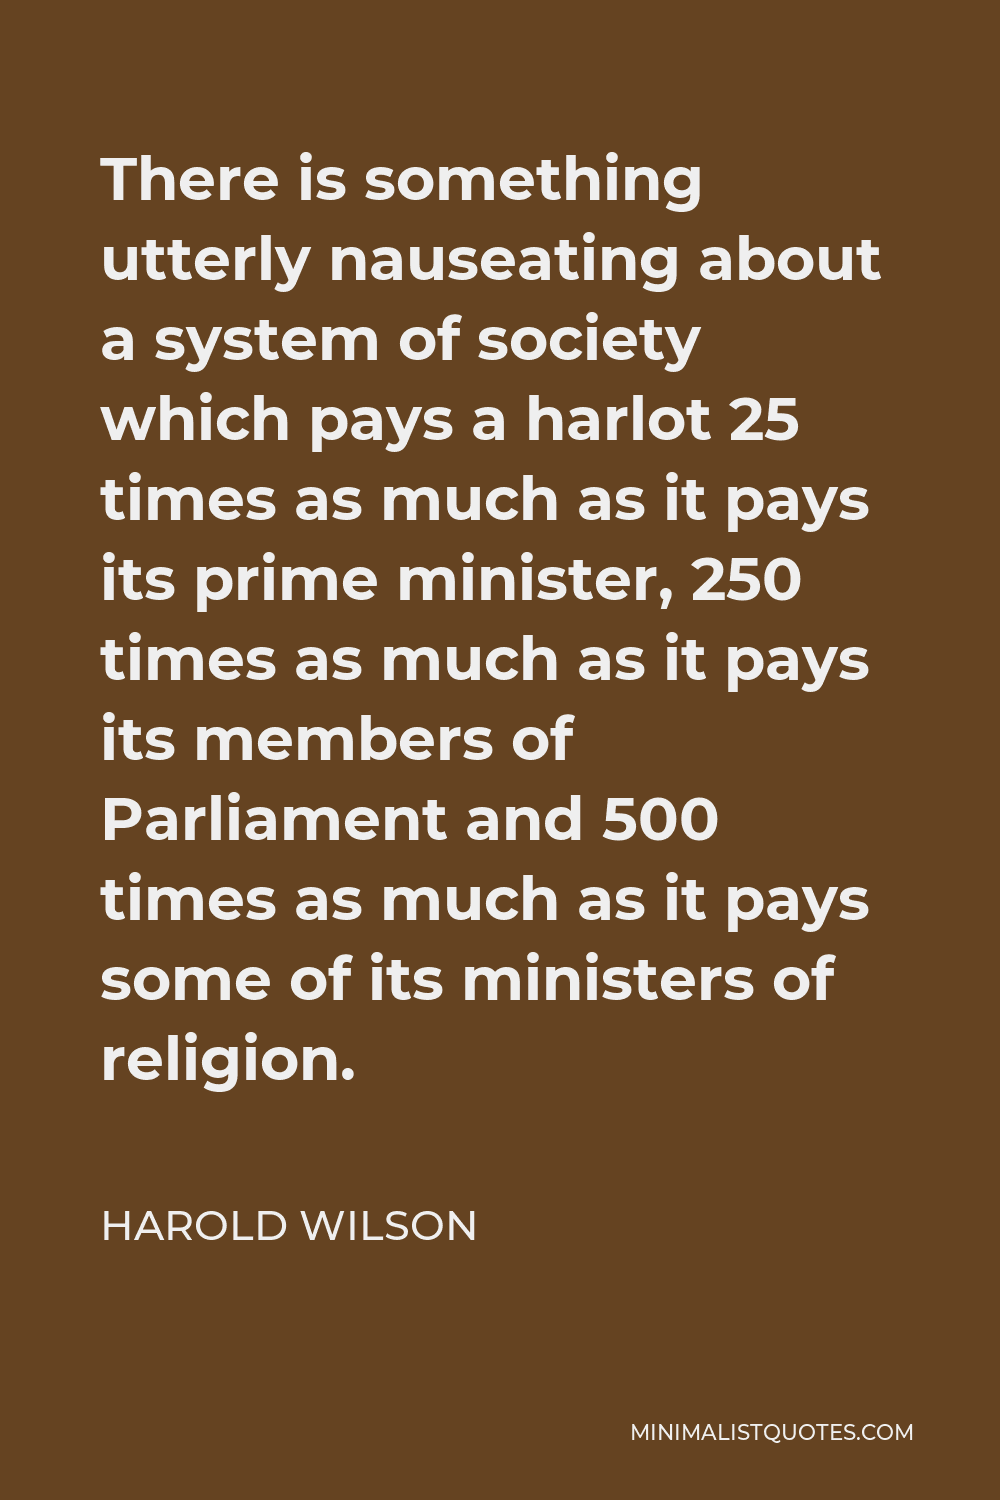 Harold Wilson Quote - There is something utterly nauseating about a system of society which pays a harlot 25 times as much as it pays its prime minister, 250 times as much as it pays its members of Parliament and 500 times as much as it pays some of its ministers of religion.